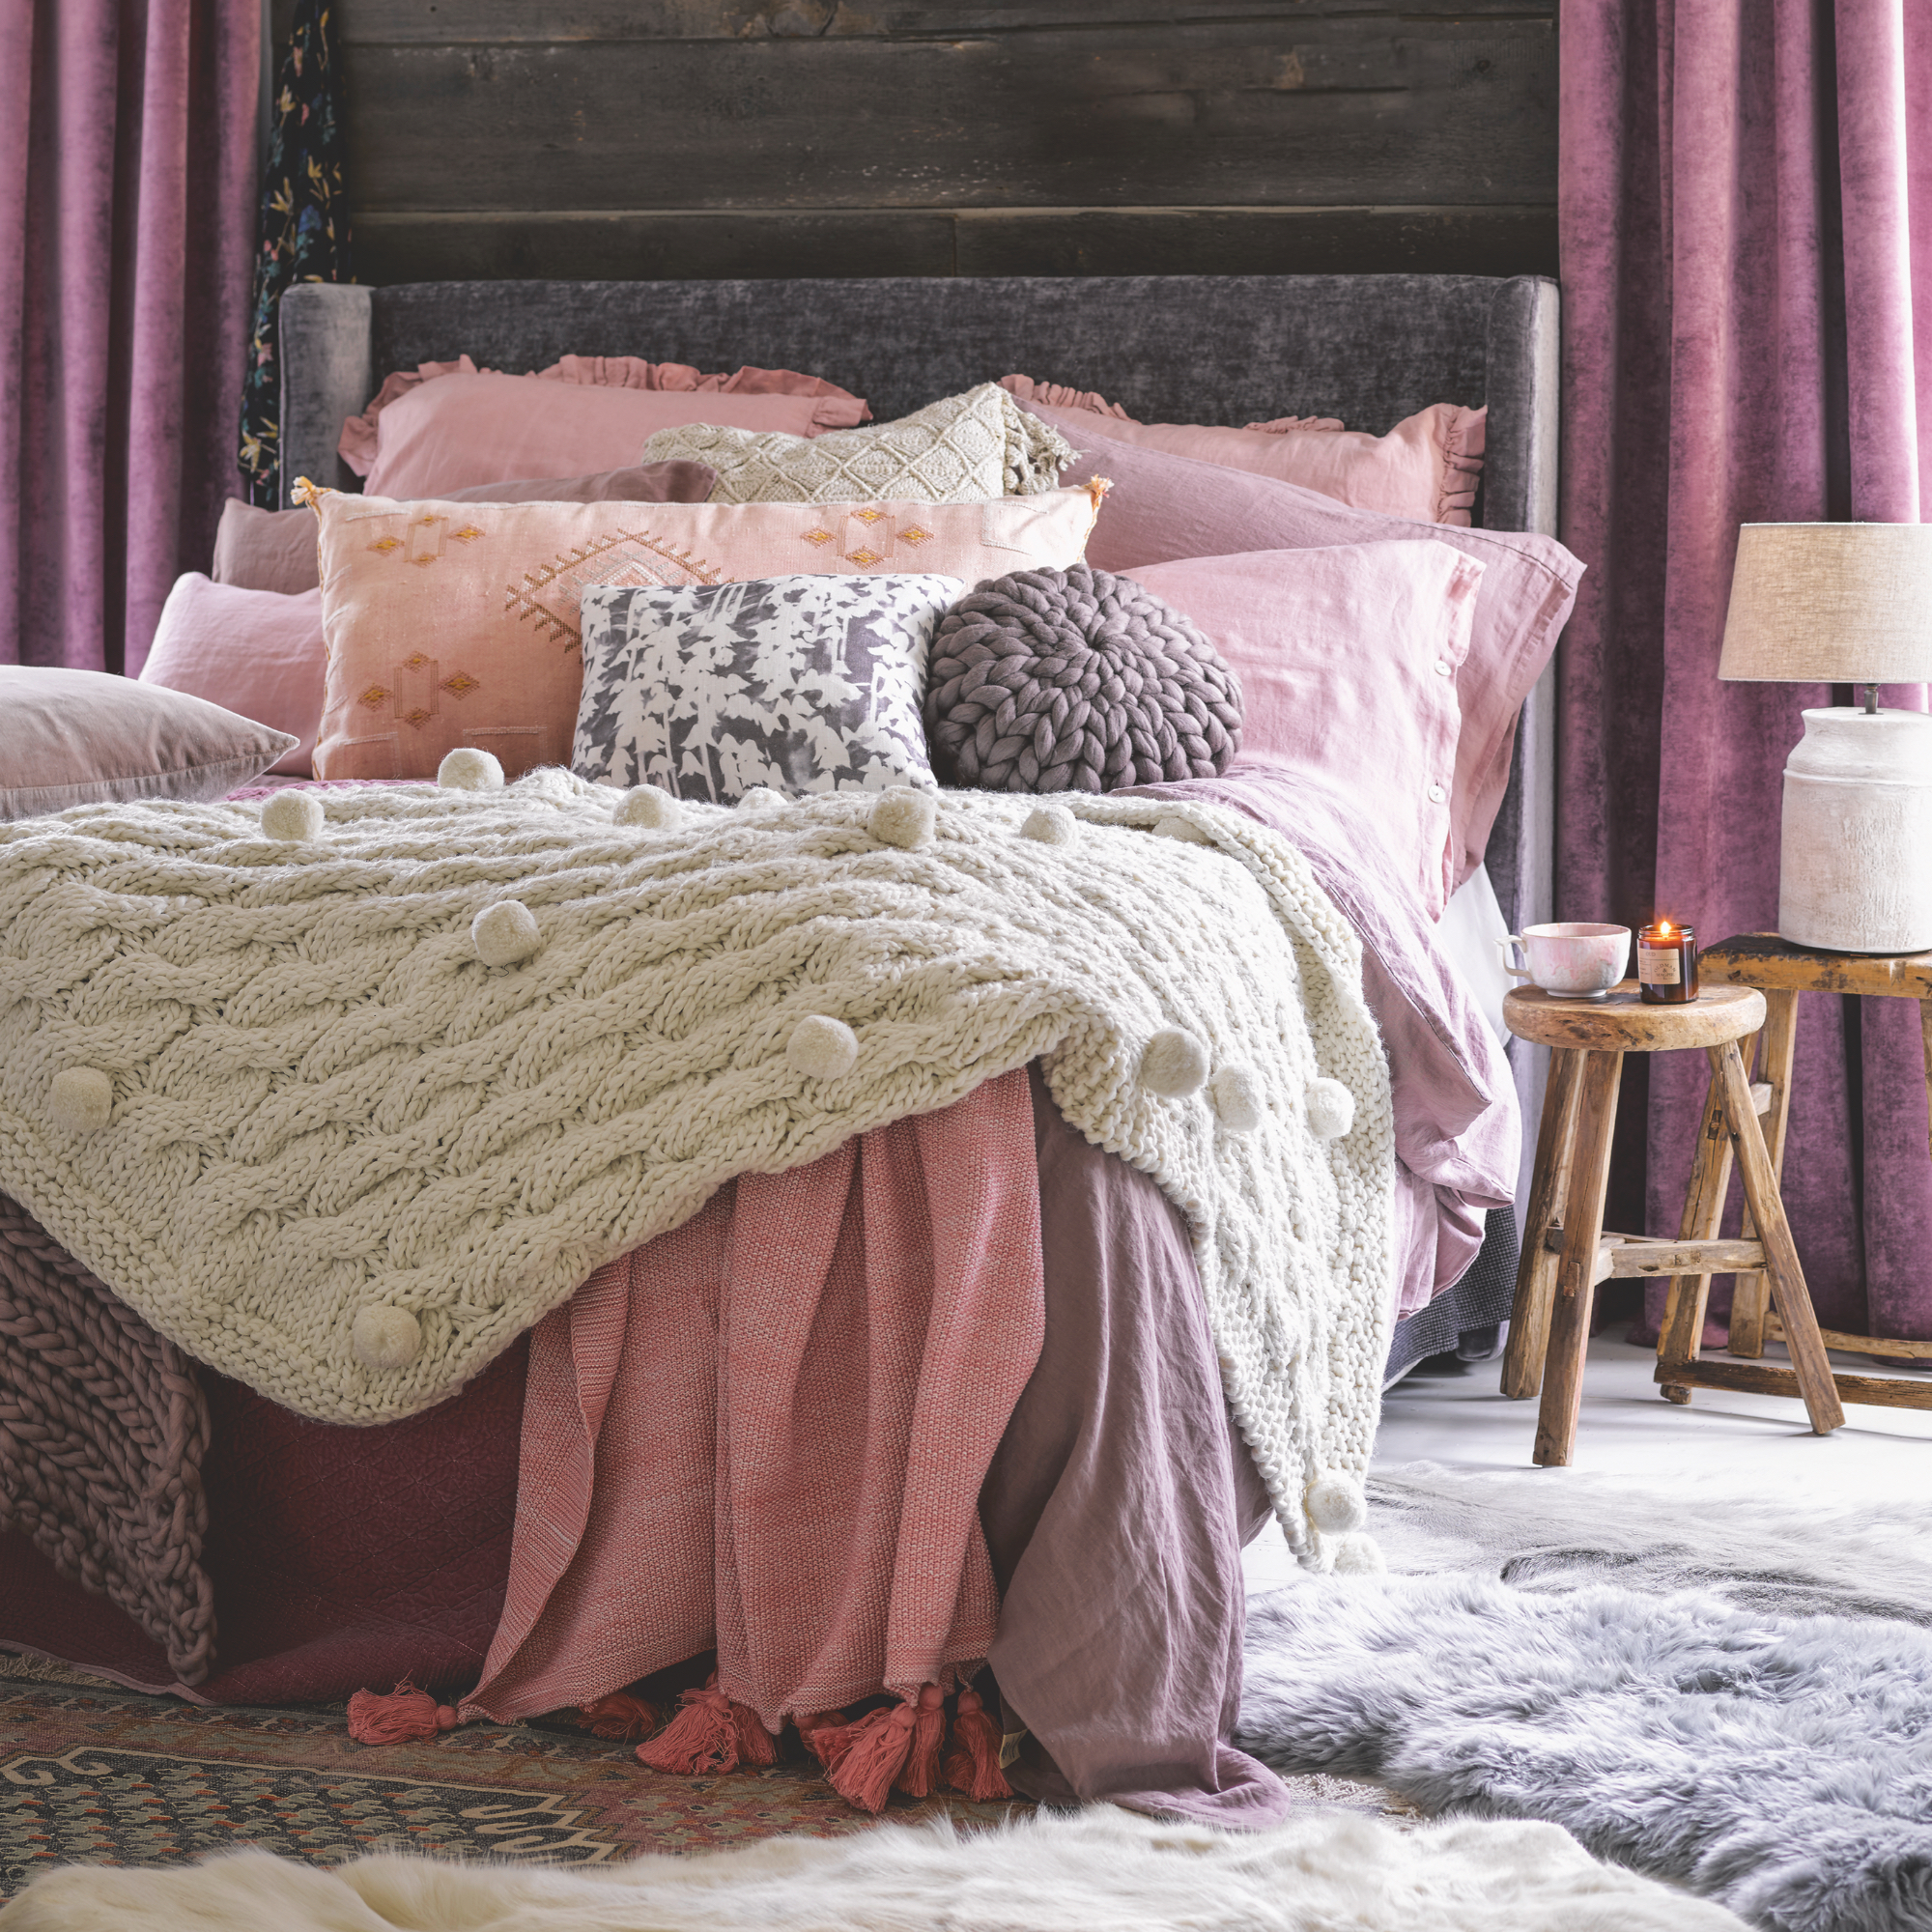 bedroom with bedding, throws and pillows